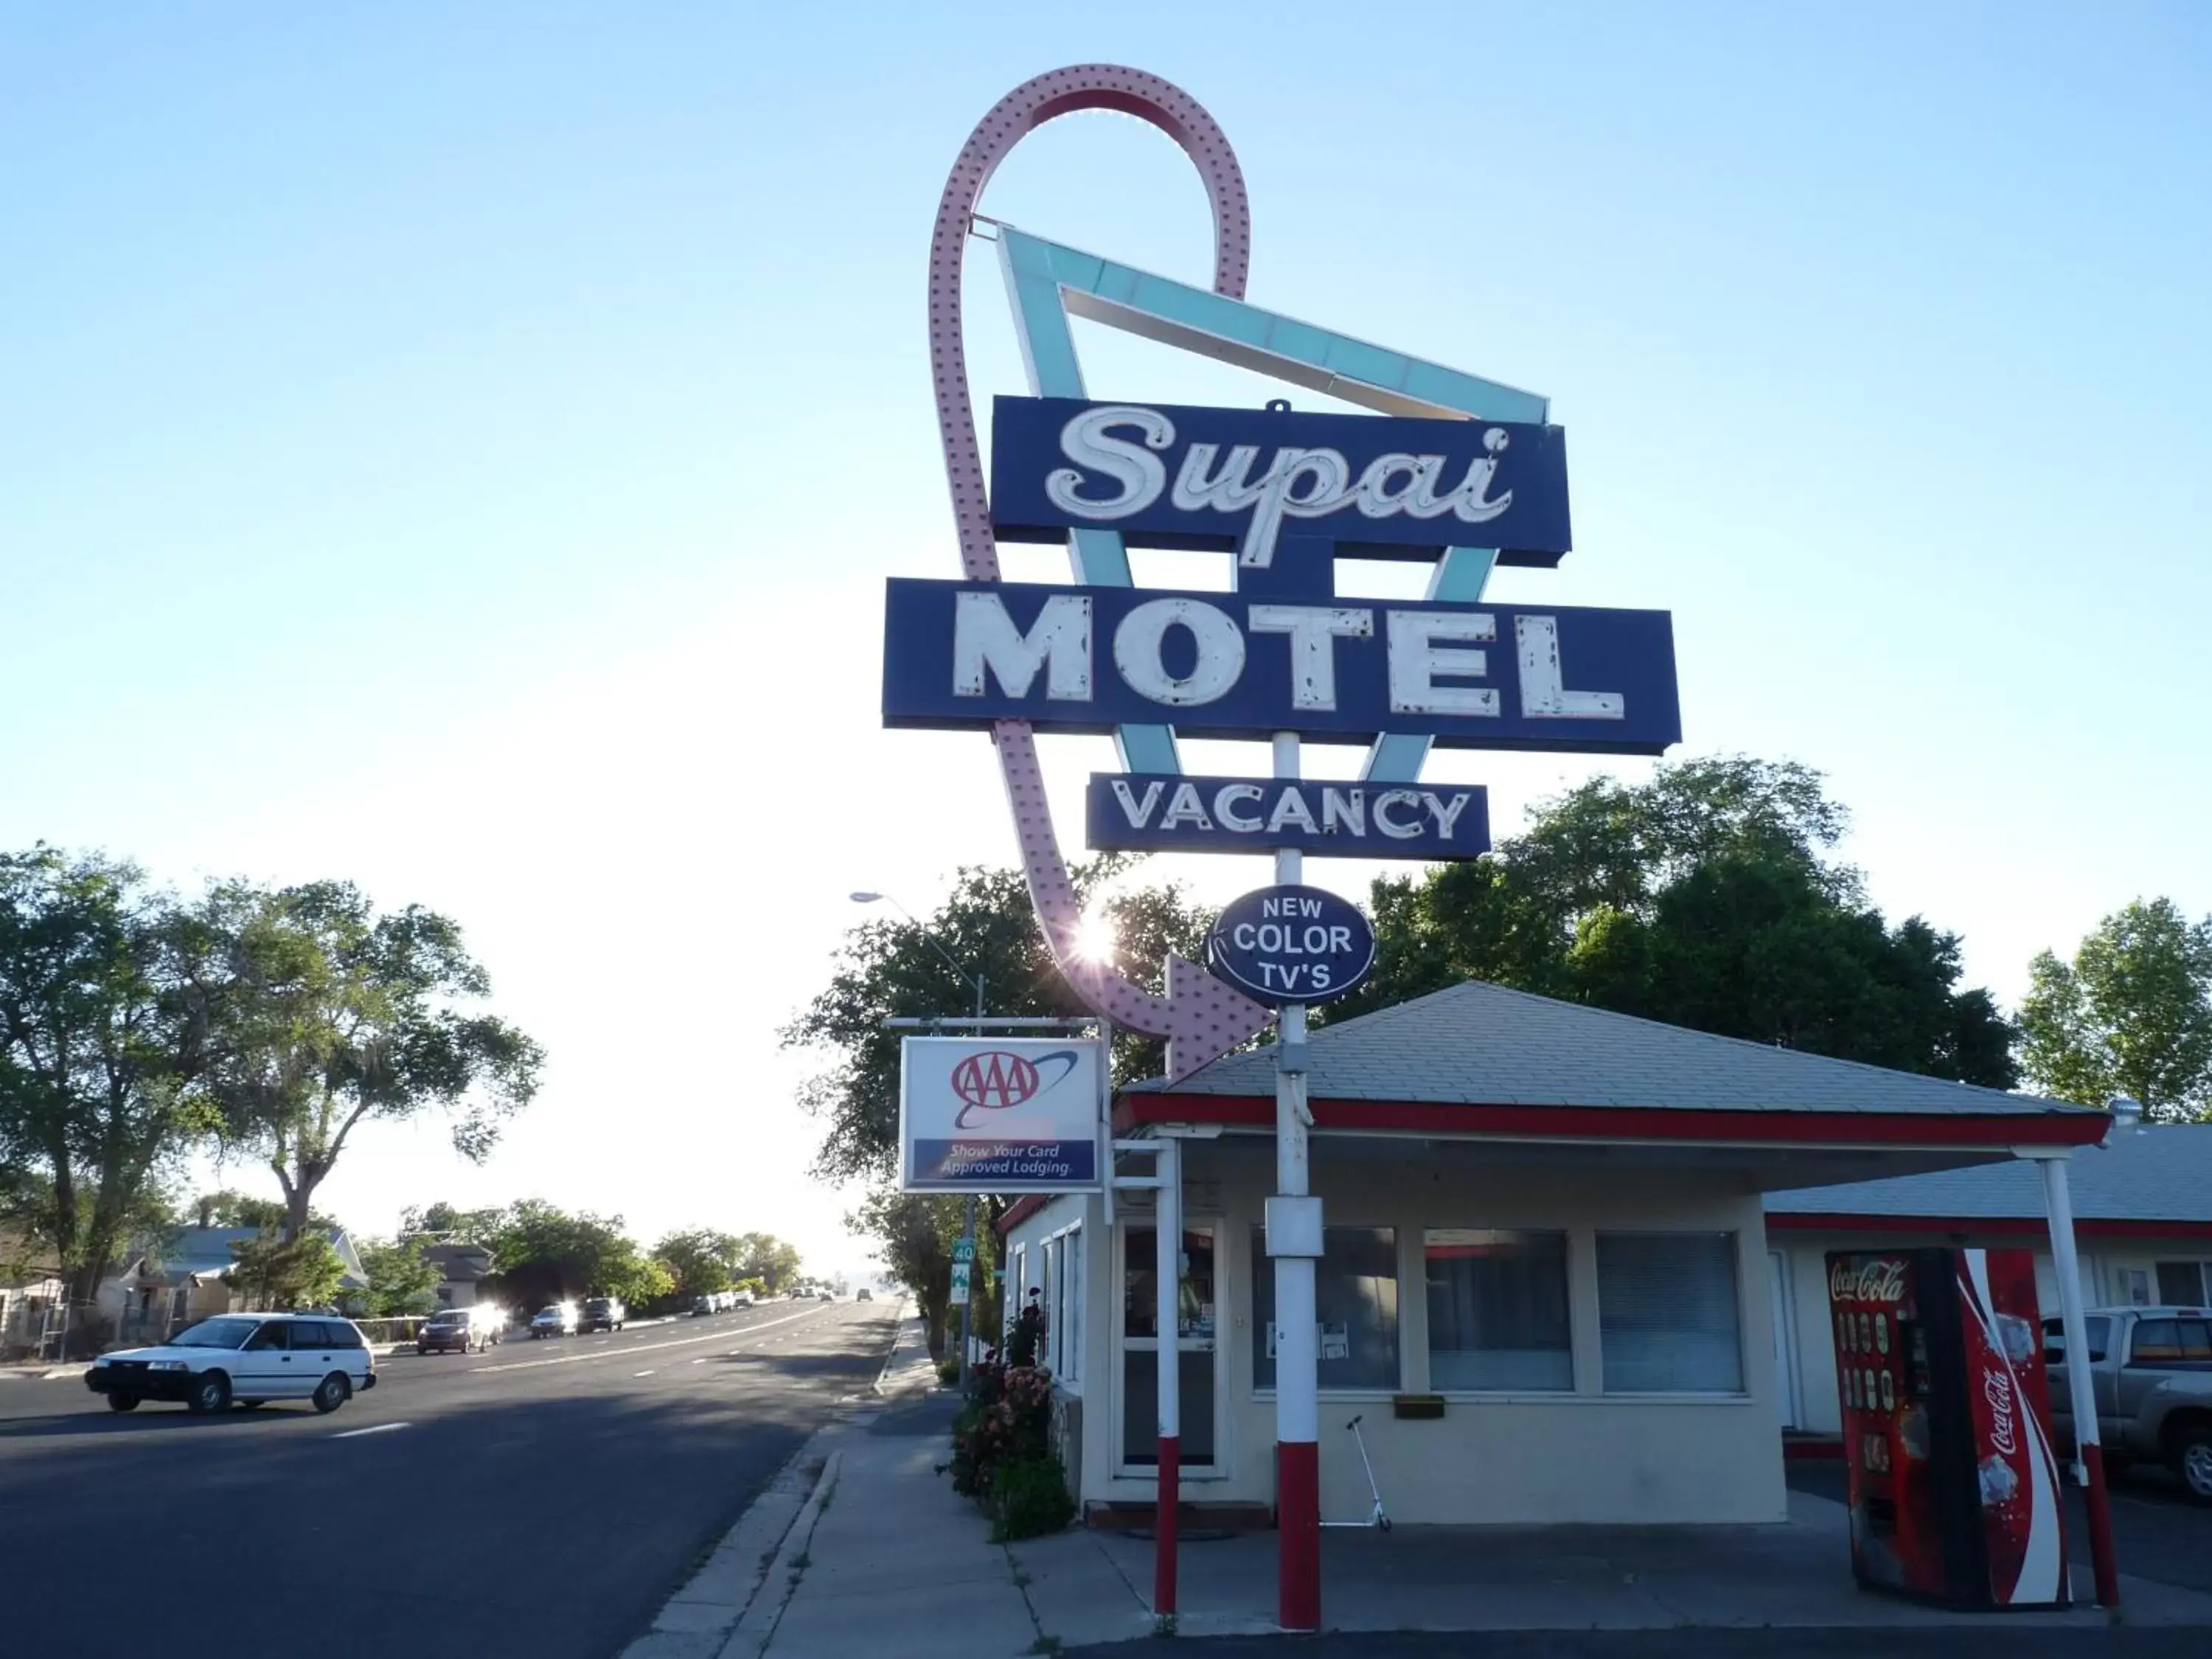 Property building in Supai Motel